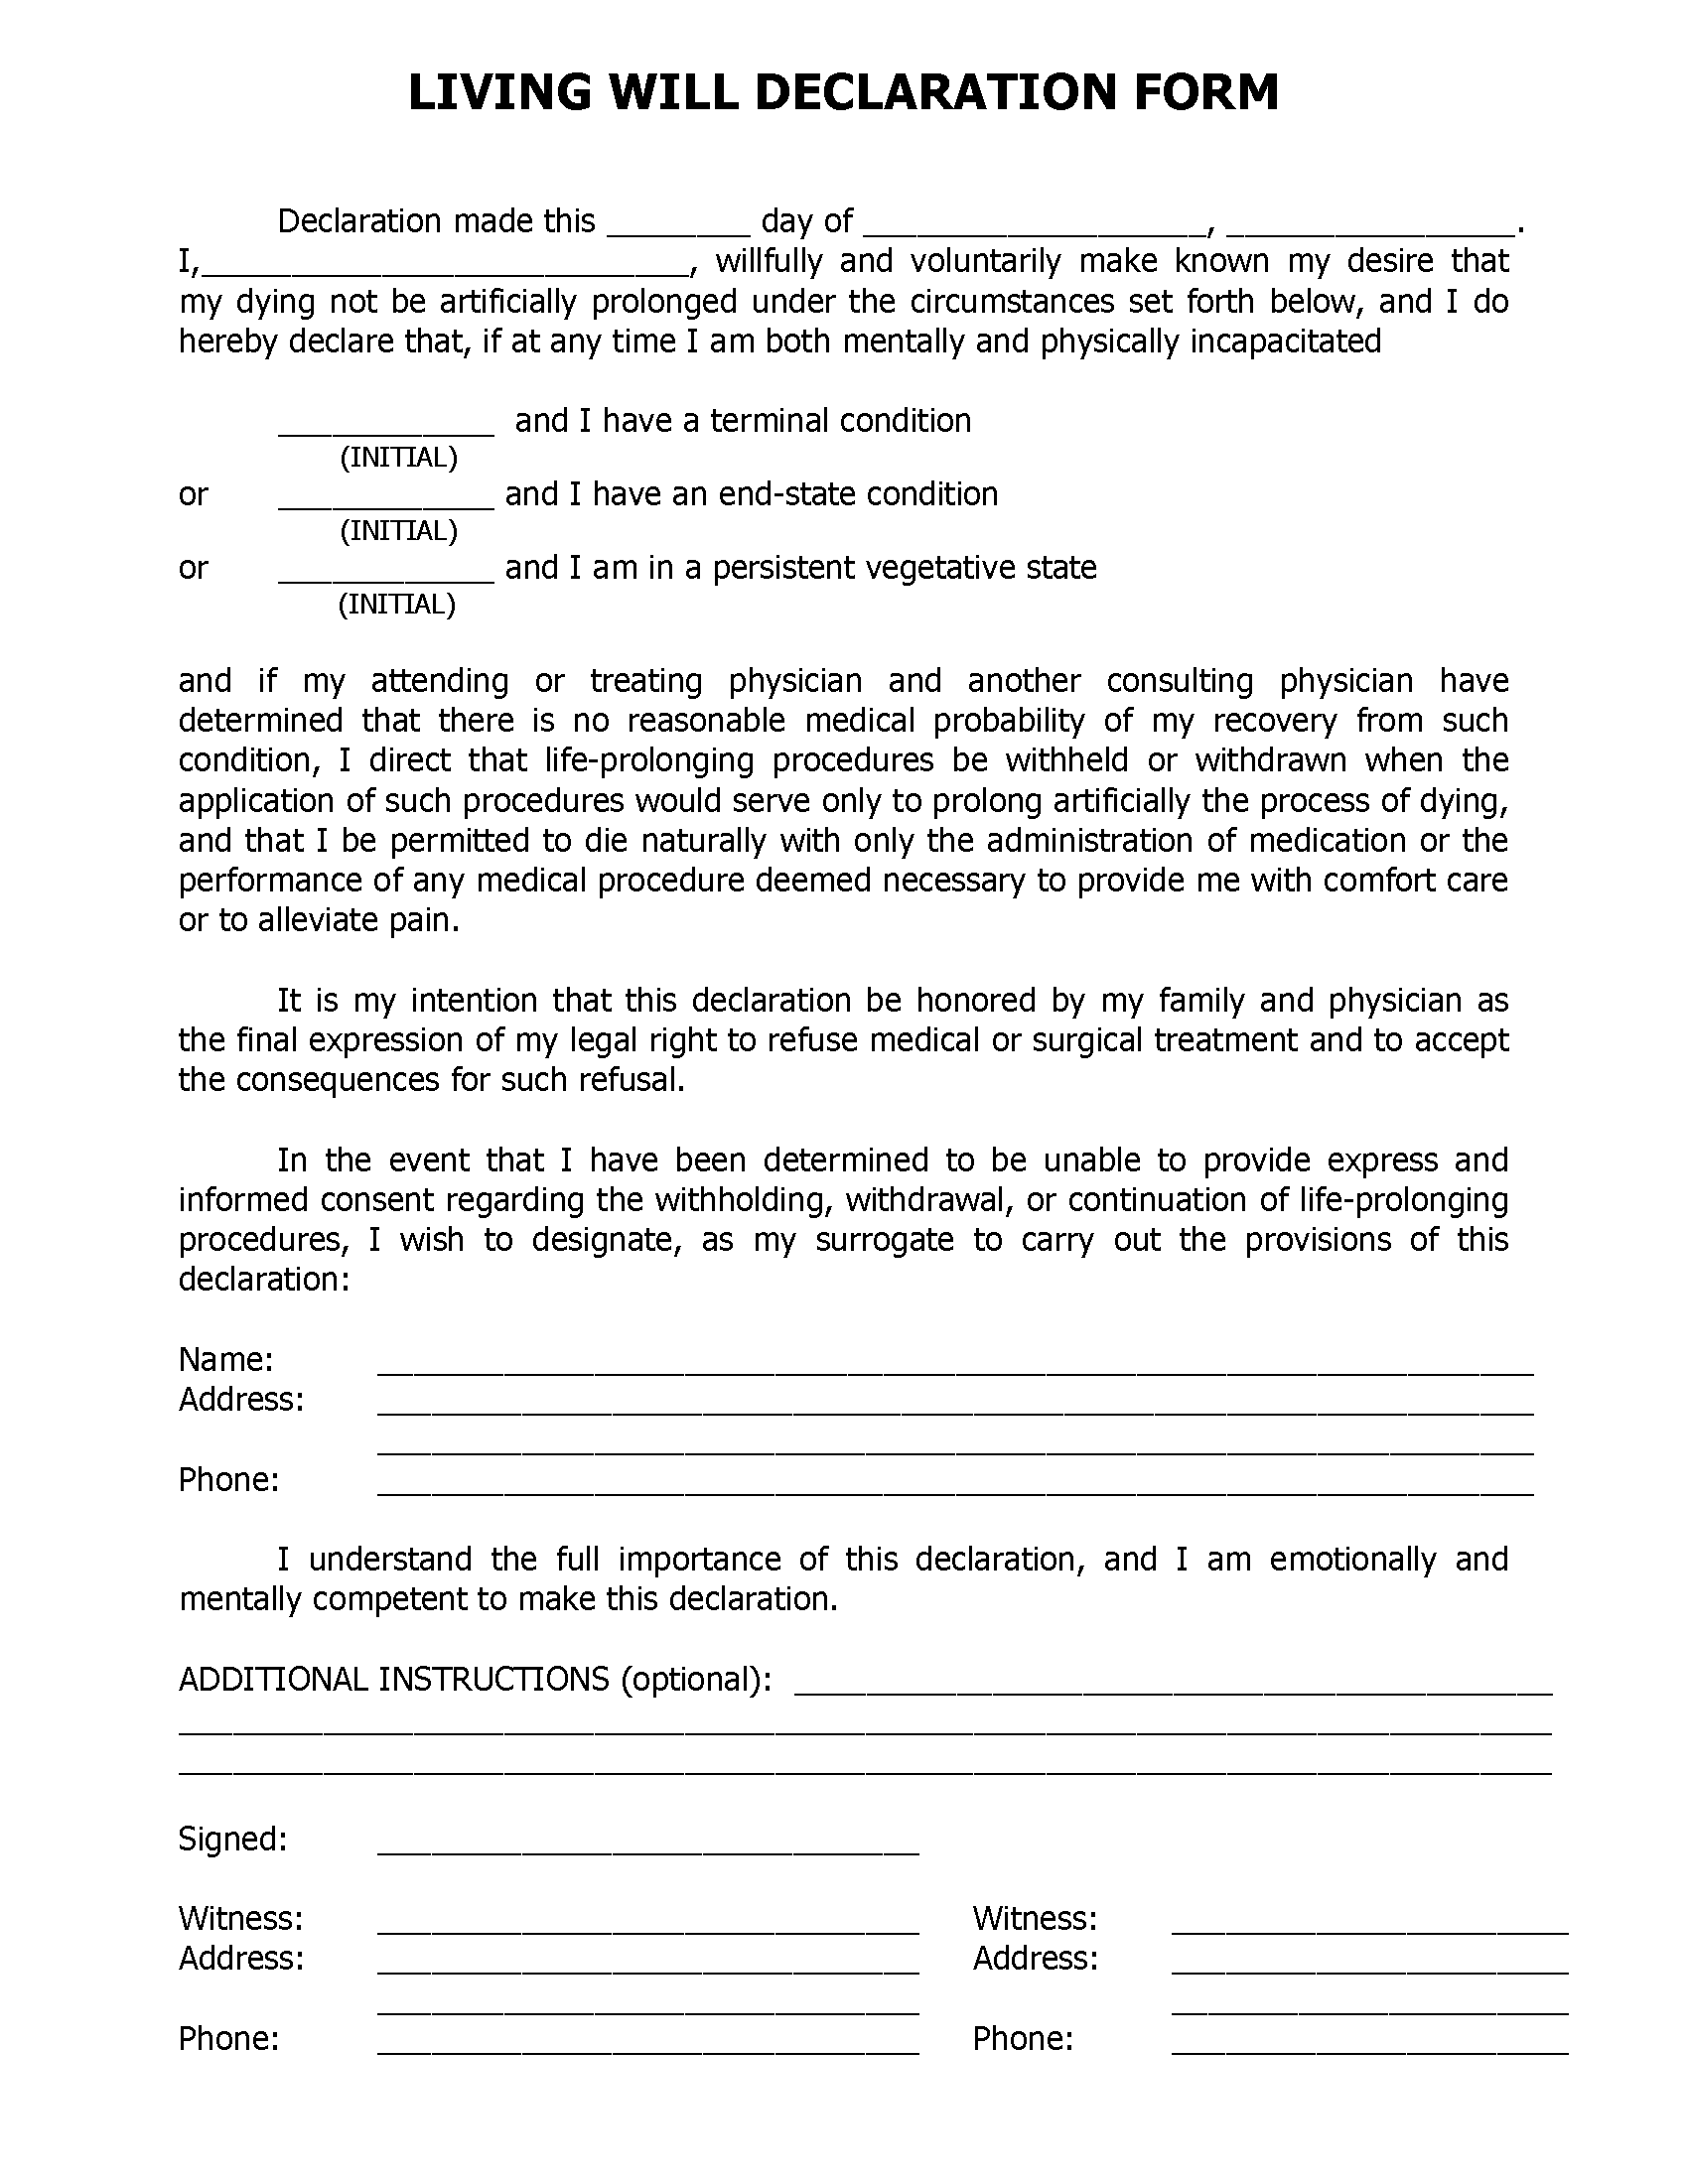 florida-living-will-form-fillable-pdf-free-printable-legal-forms